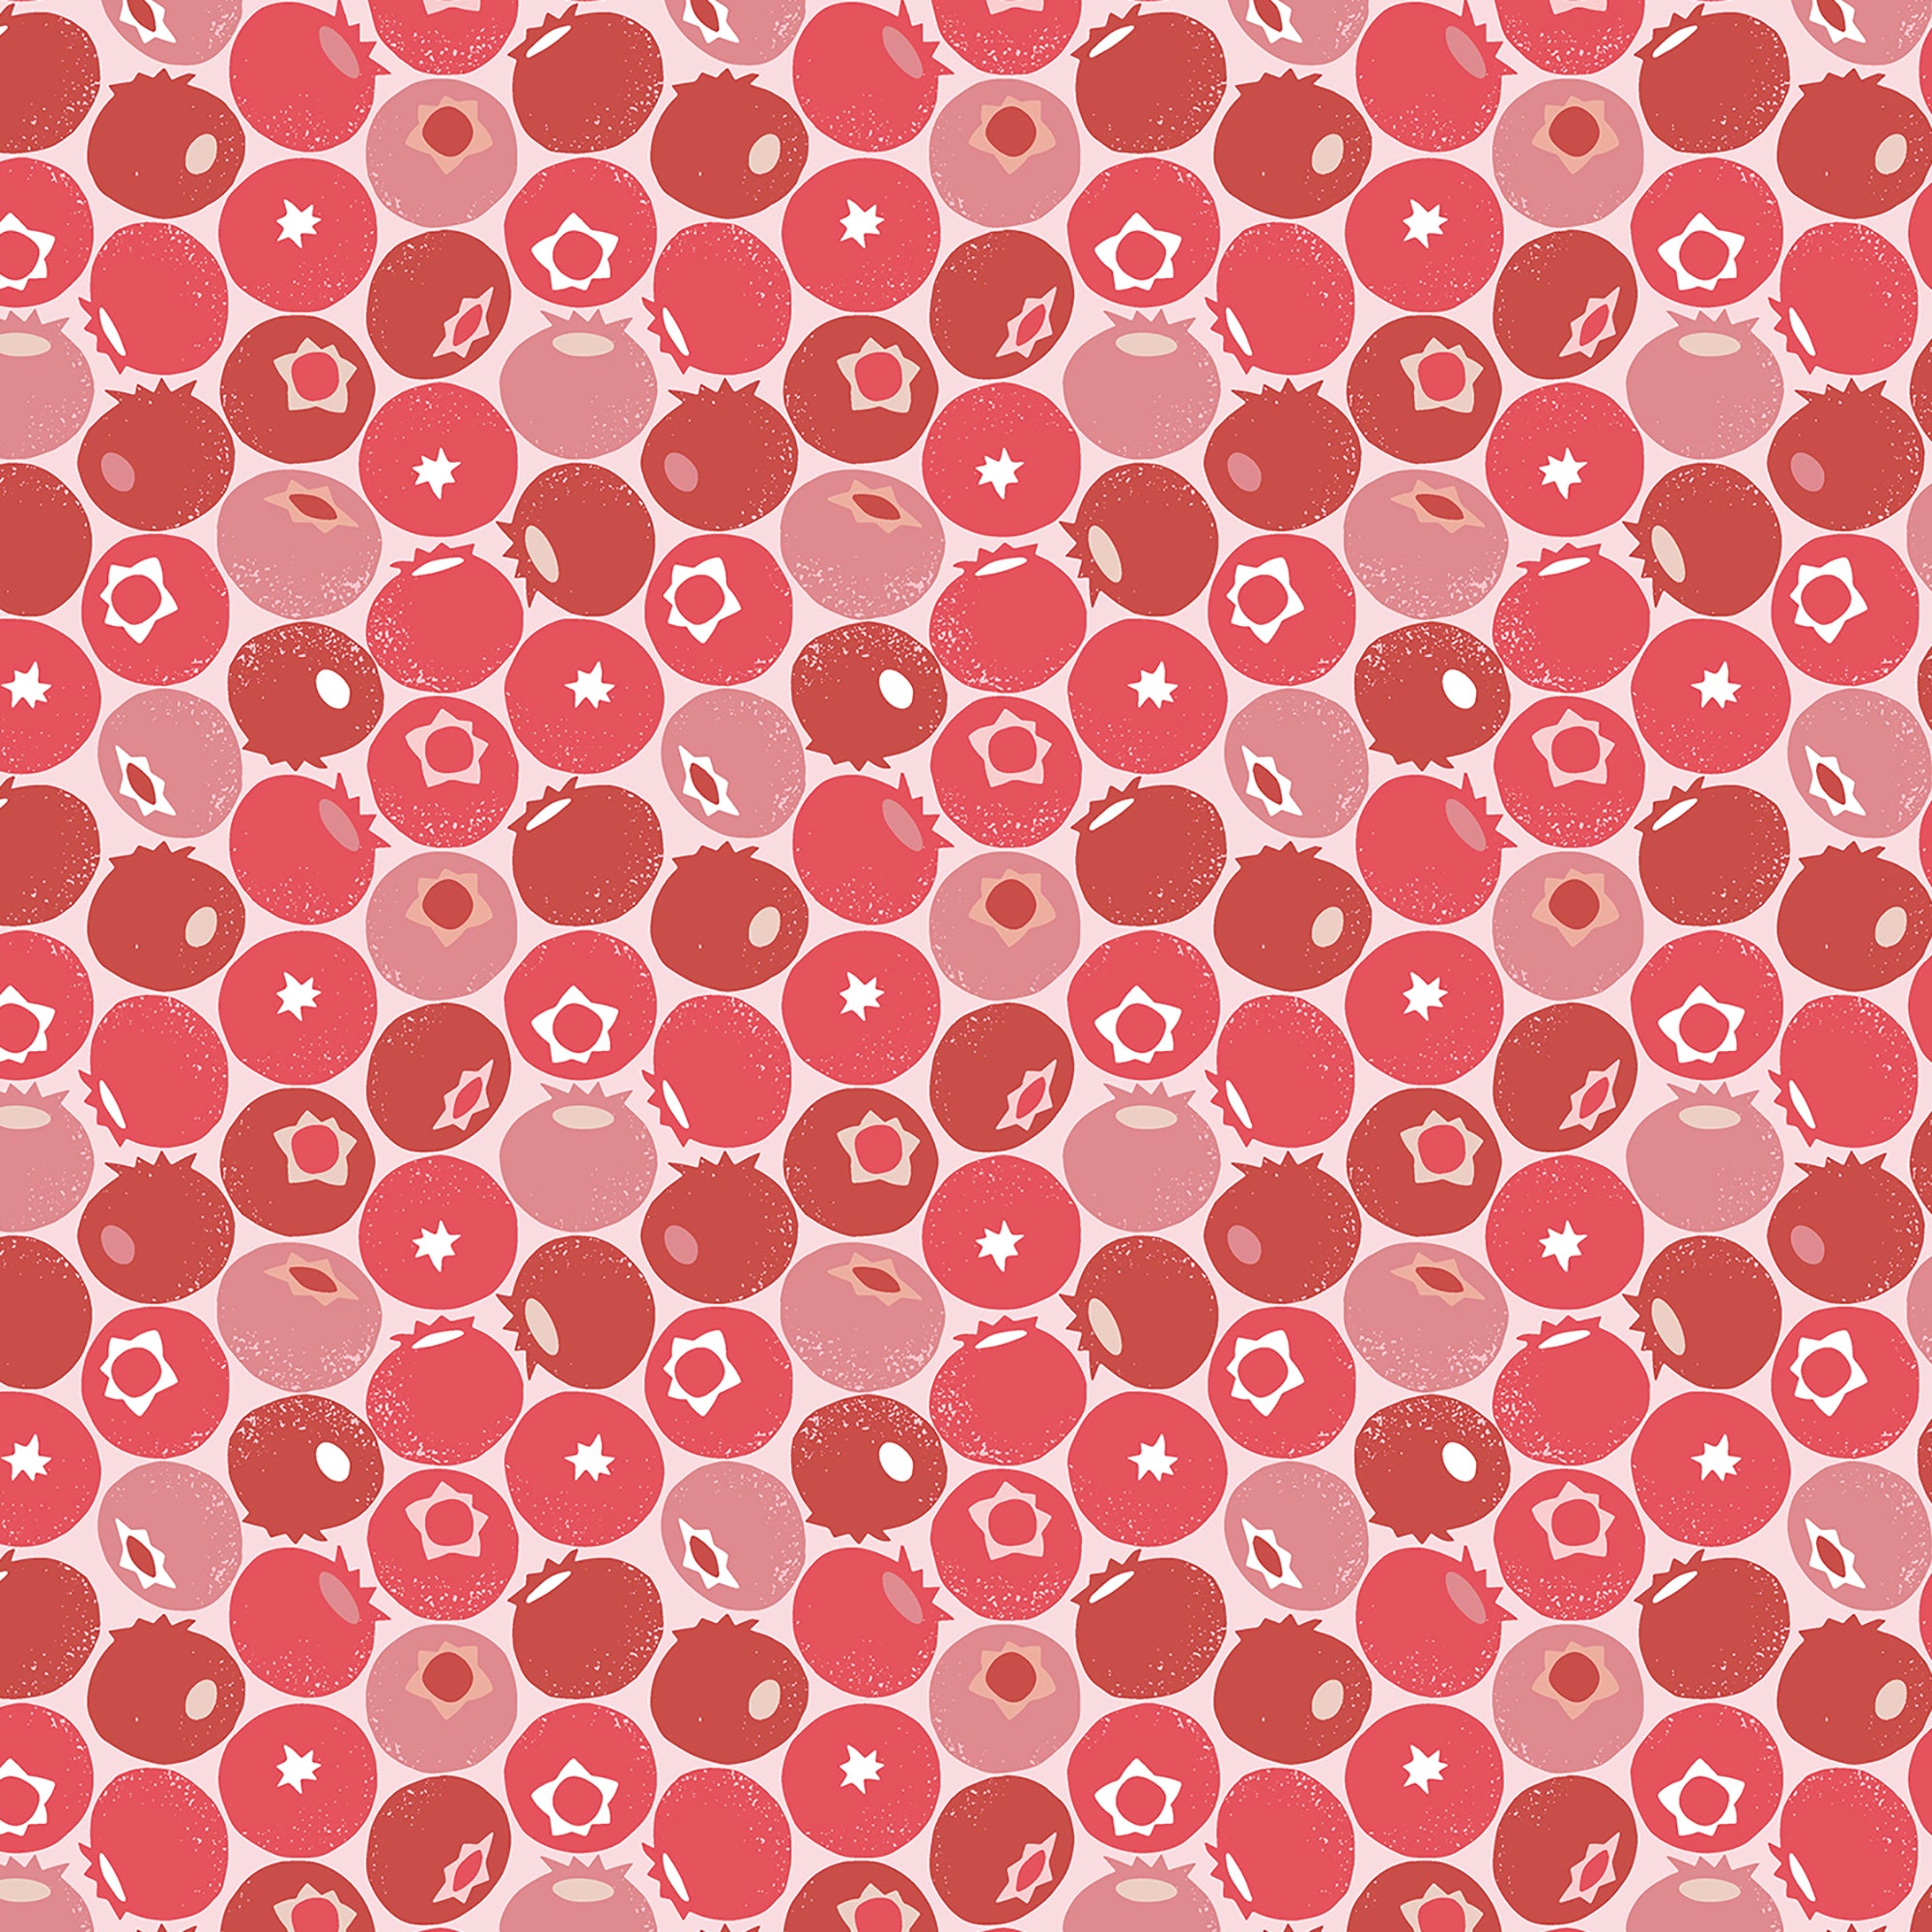 Under the Apple Tree - Blueberry Currant Fabric